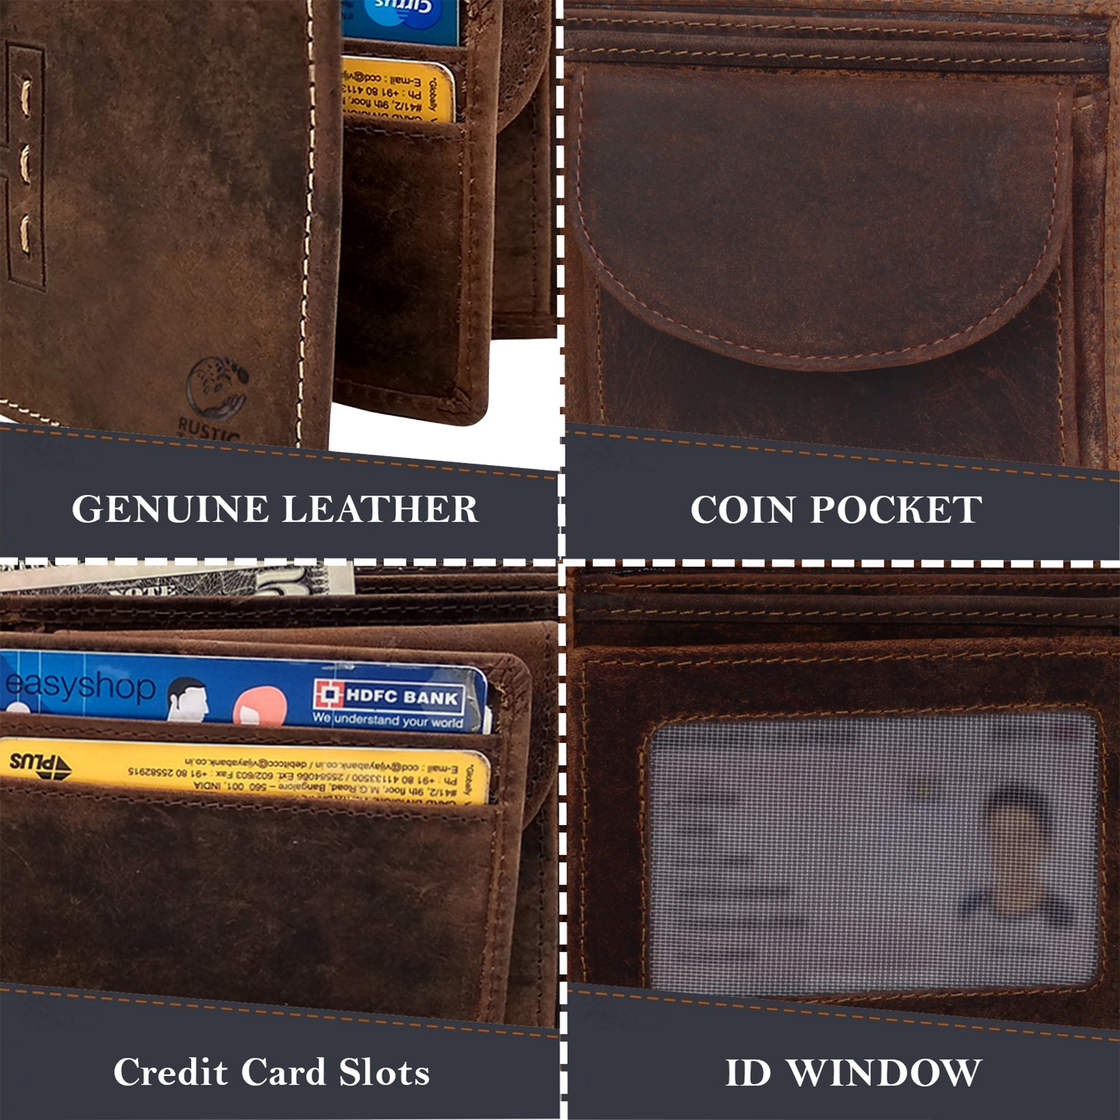 Le N°03' Couio. Stitchless Leather Bifold Wallet with Coin Pocket – Lejiled